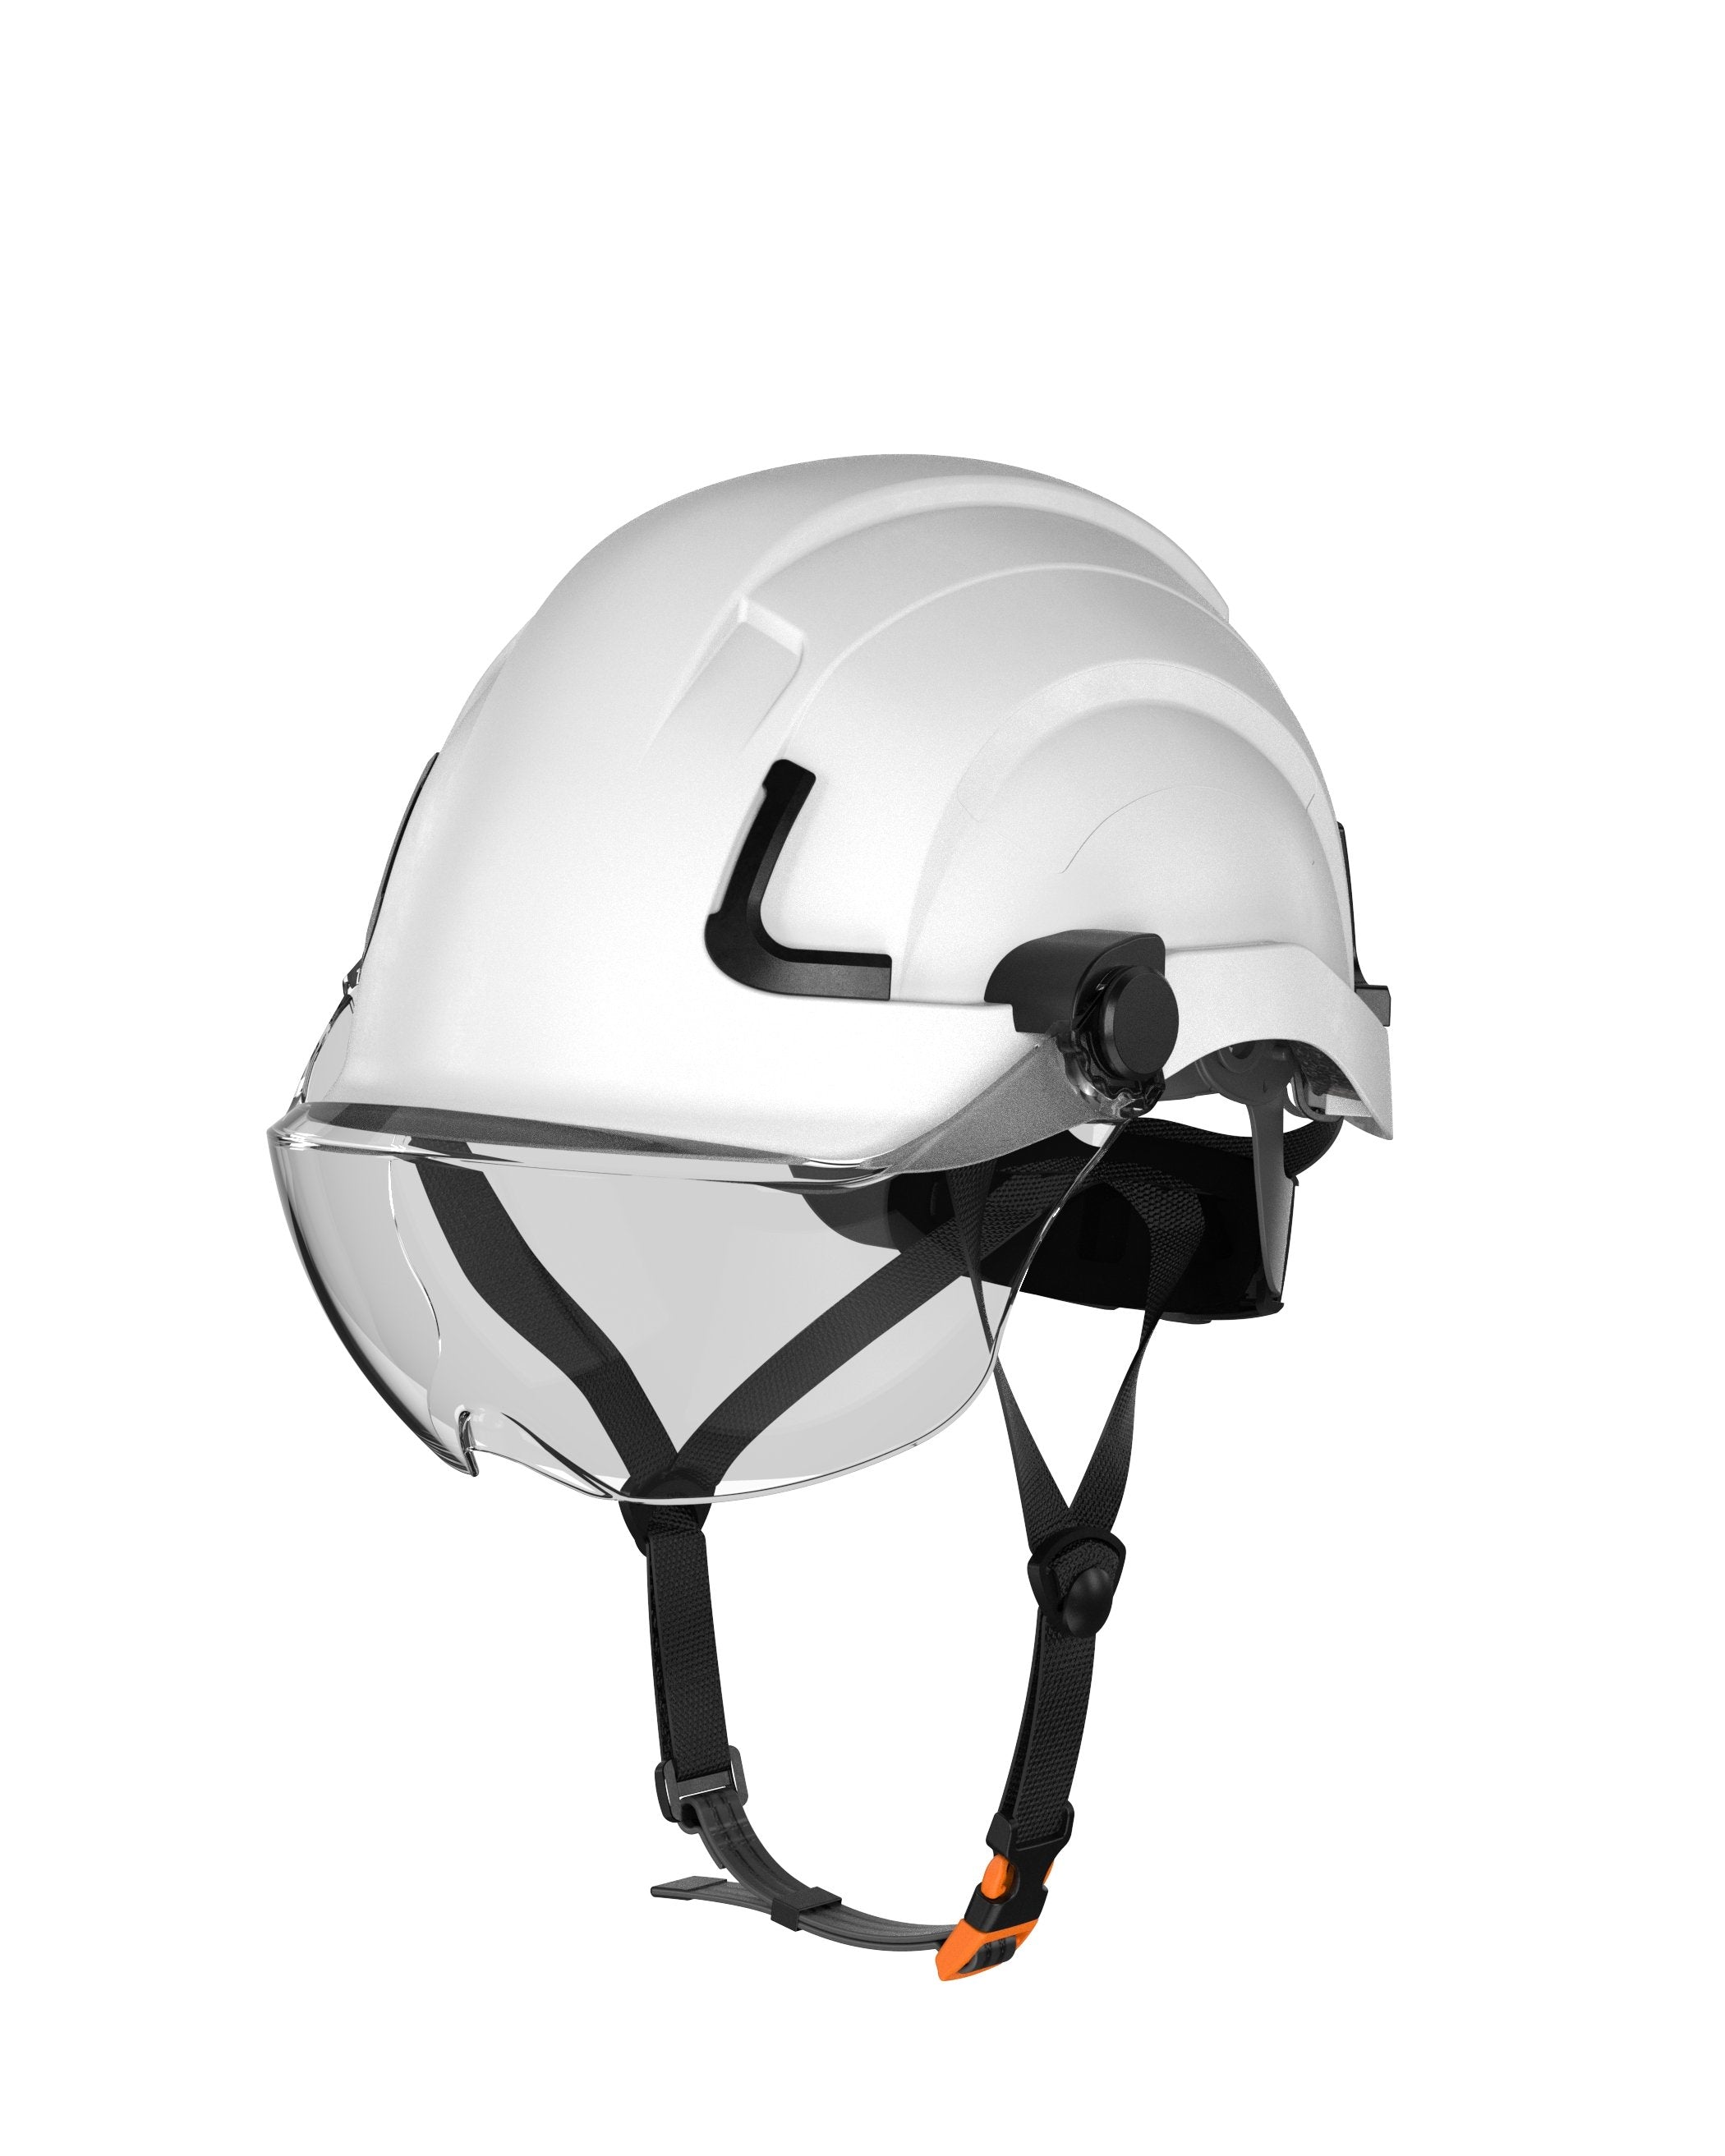 H2-EH Safety Helmet Type 2 Class E, ANSI Z89 and EN12492 rated